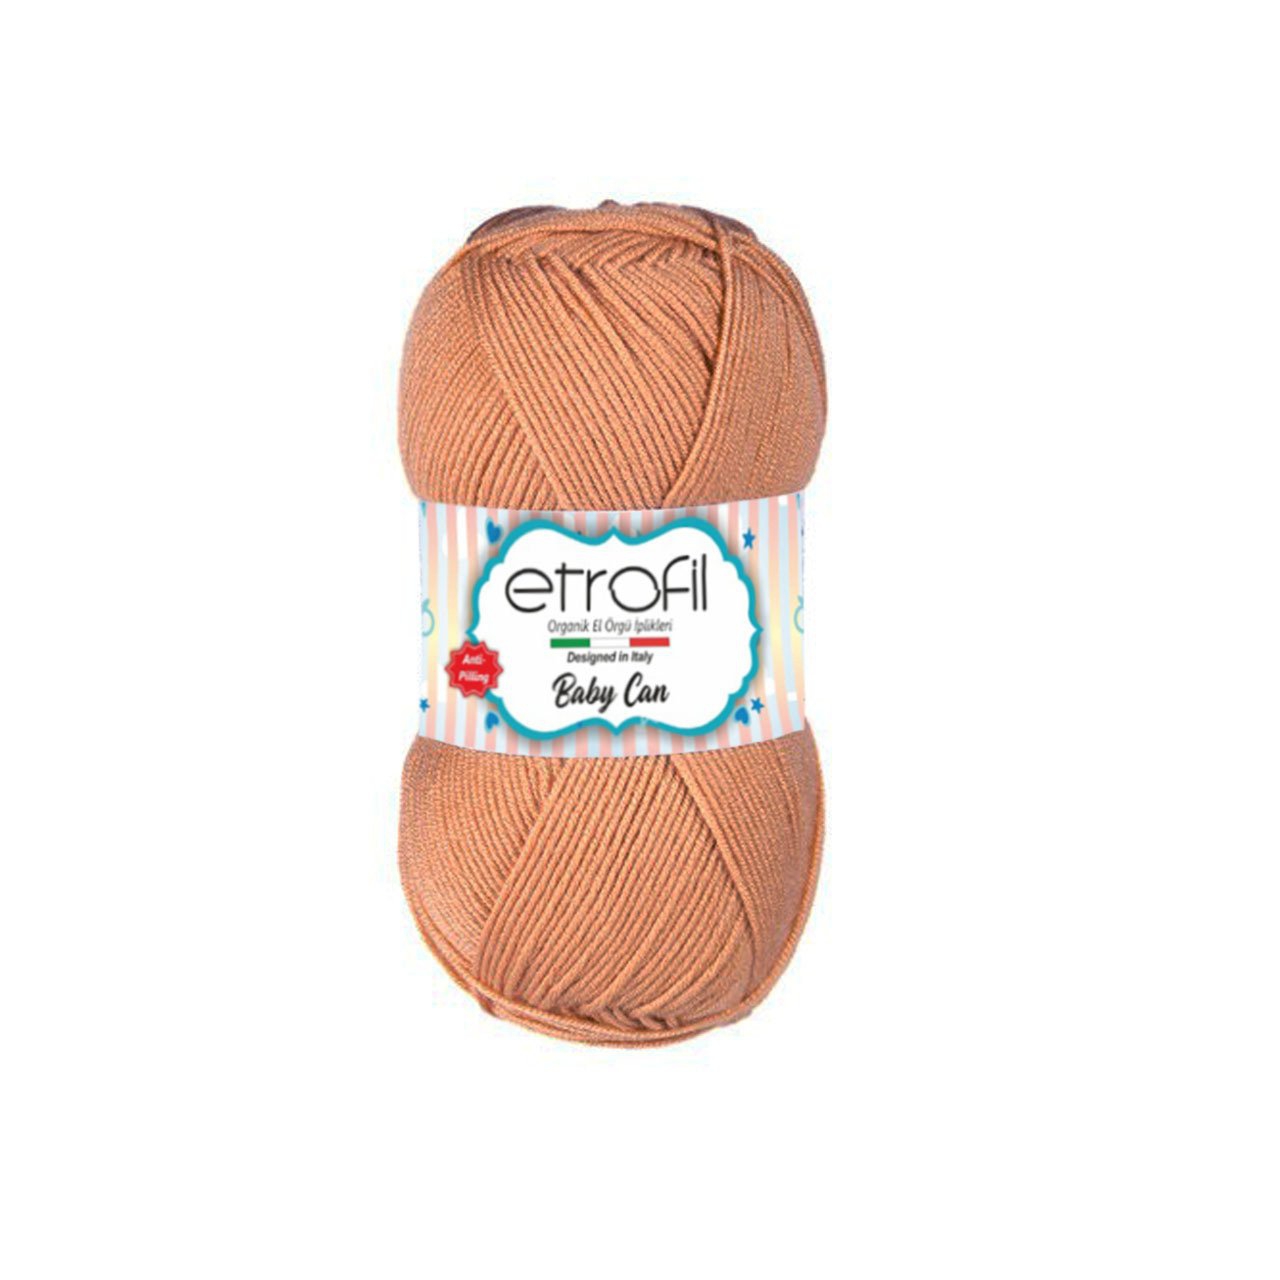 Etrofil Baby Can 80070